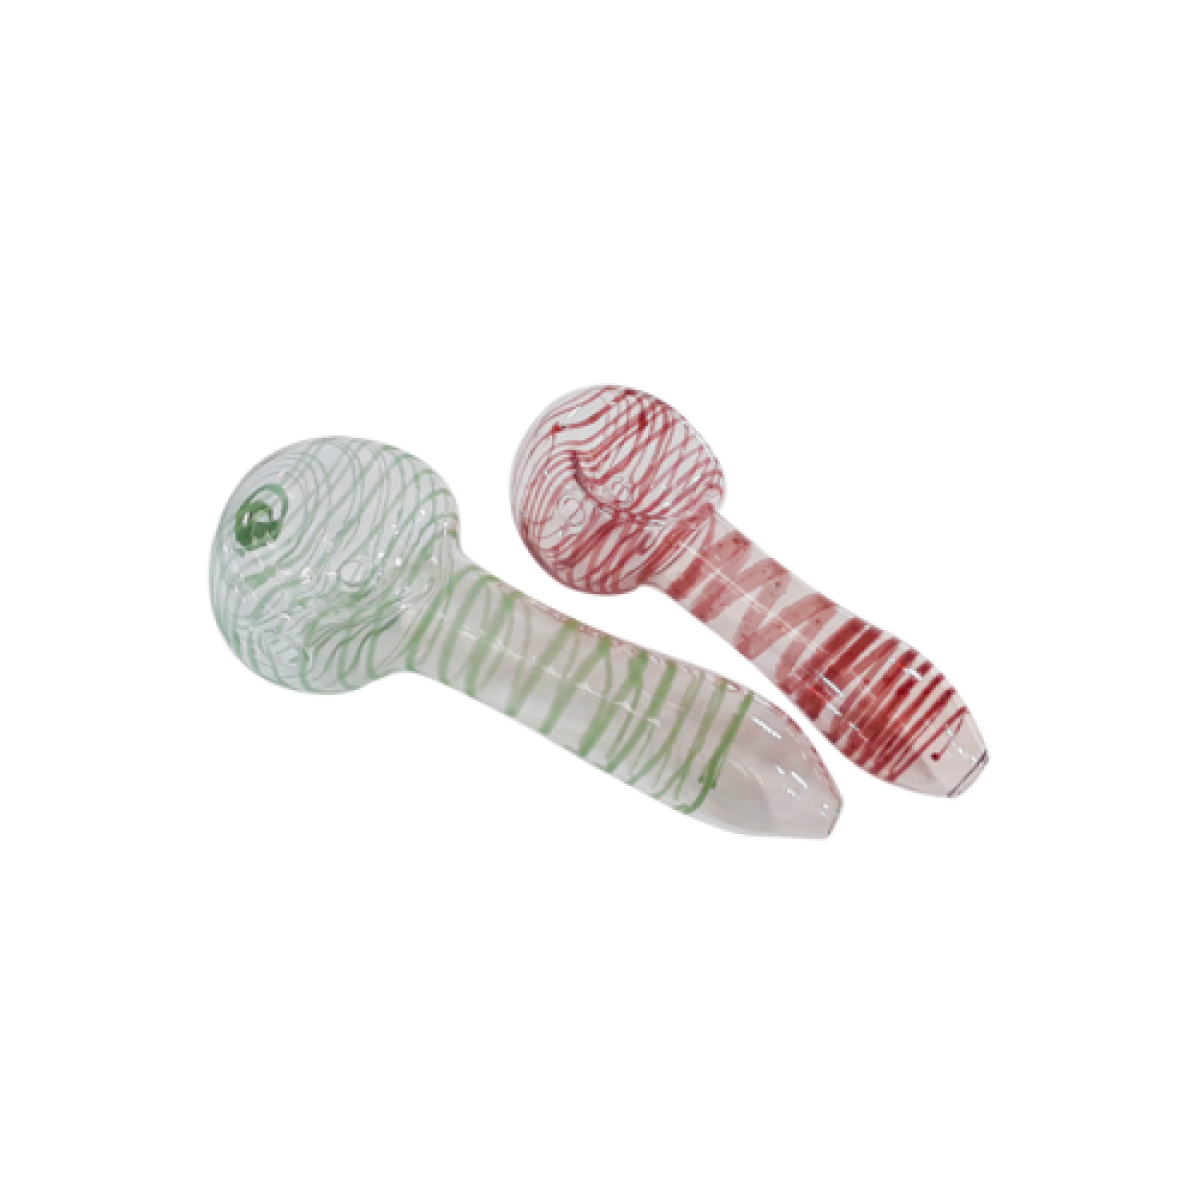 2.5 in. Peanut Handpipe with Linework (Pack of 4pcs)